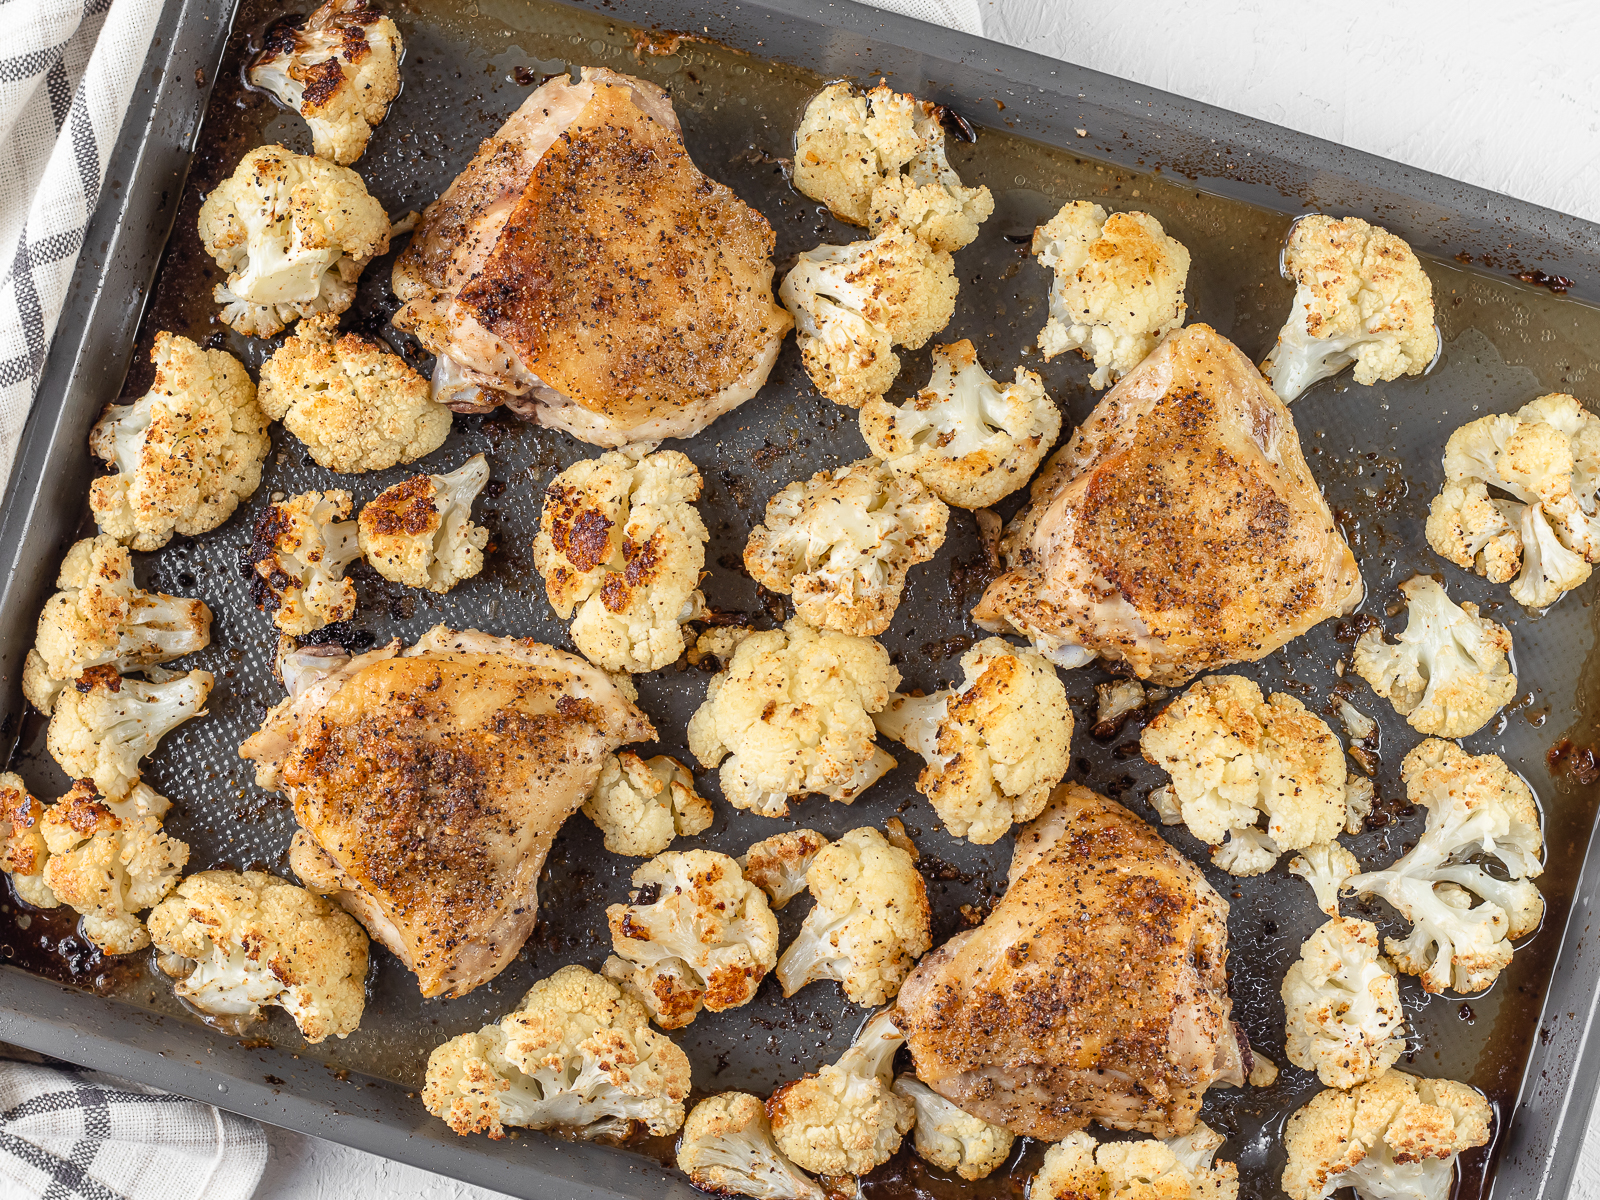 A baking sheet with baked Cajun Chicken Thighs and roasted cauliflower.